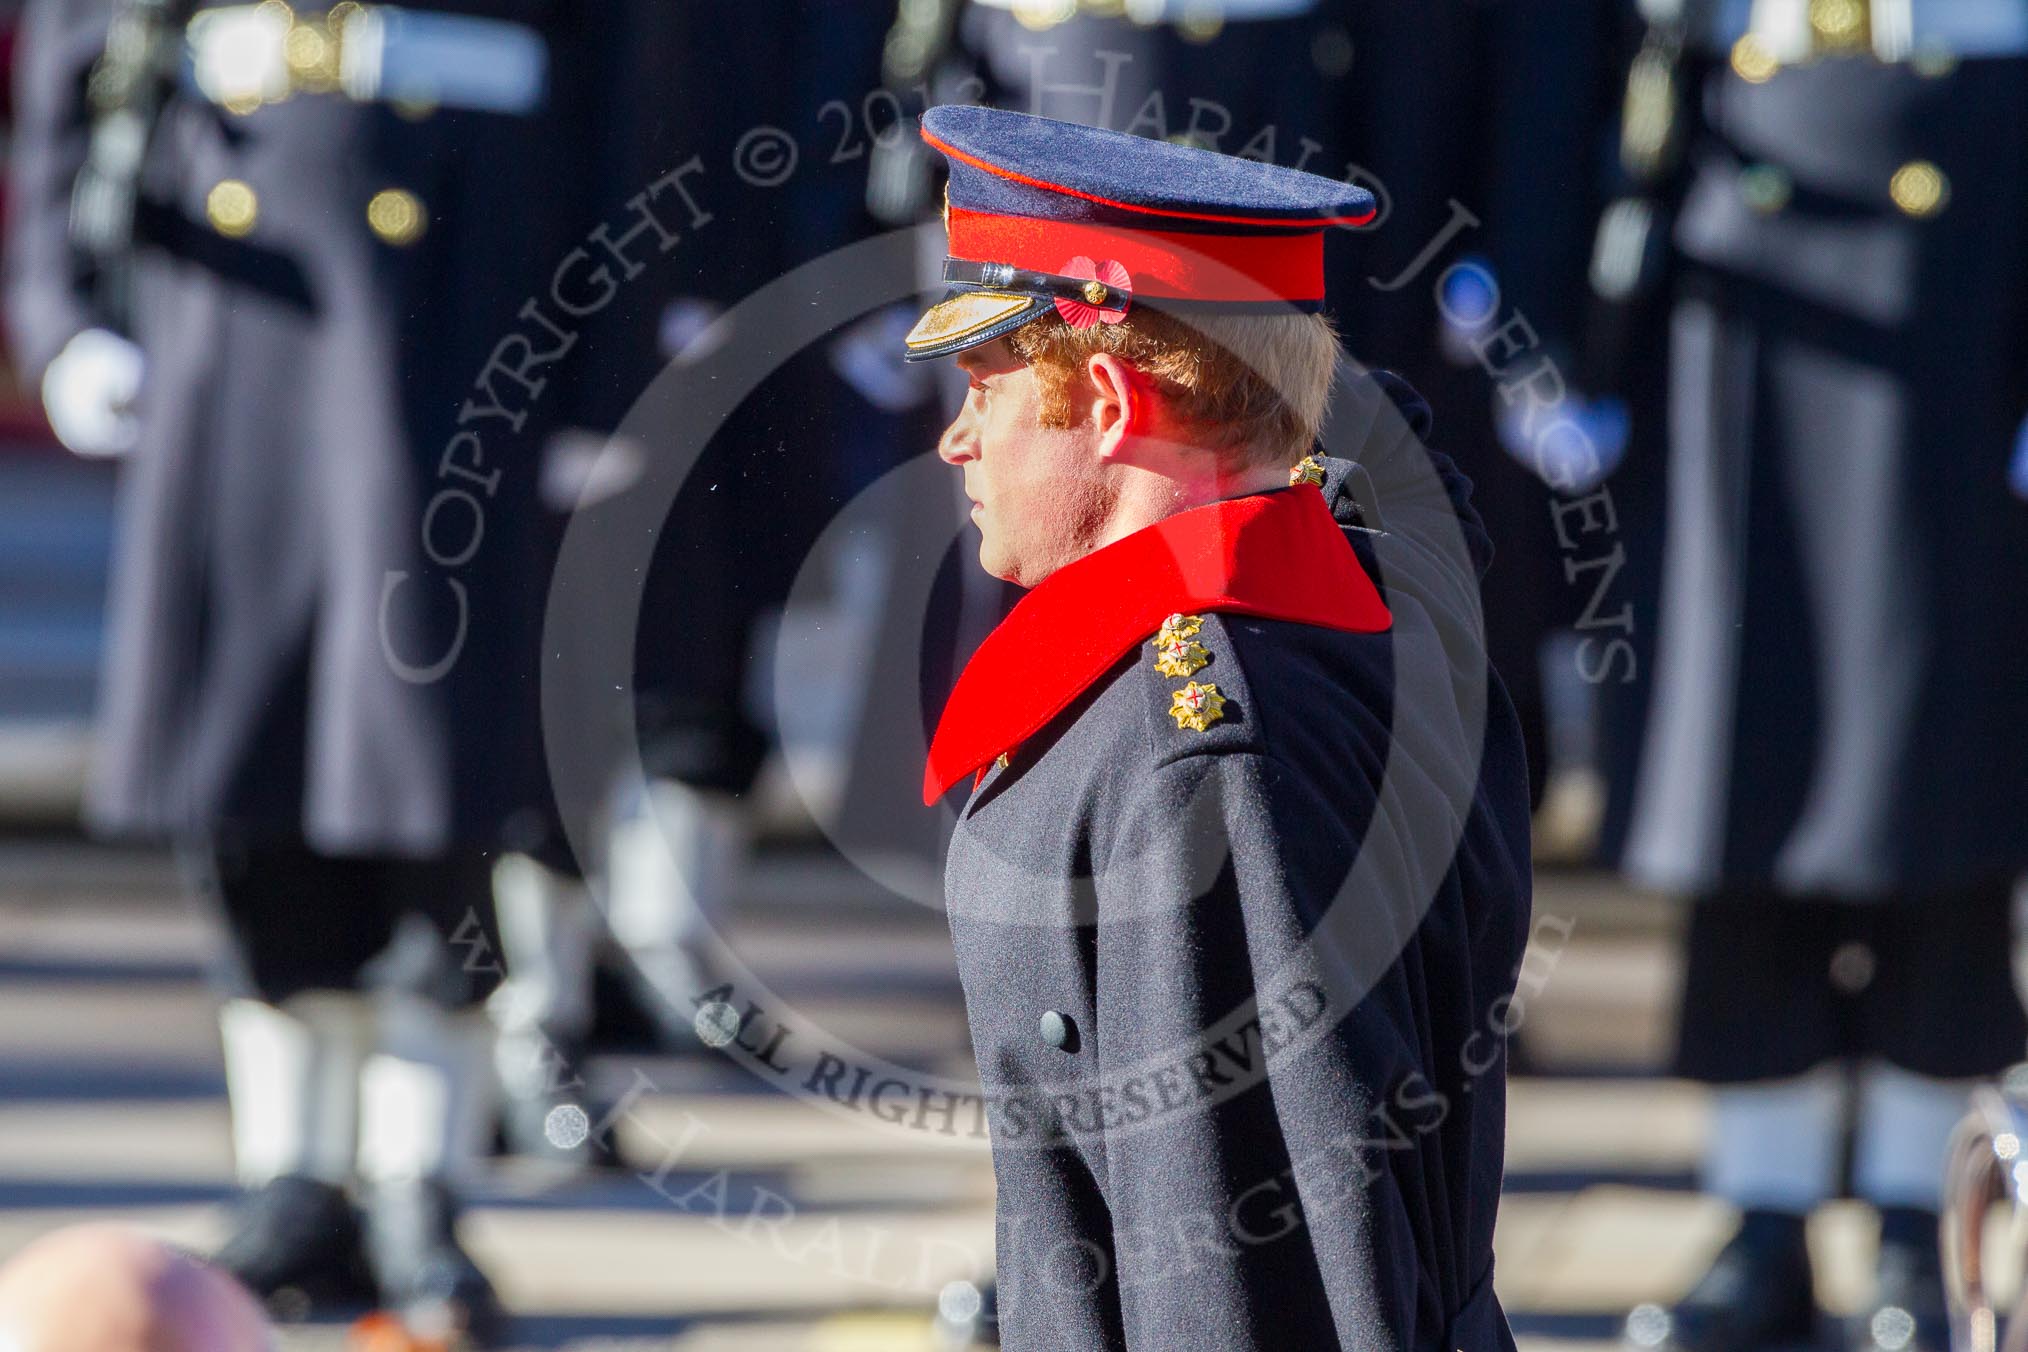 HRH Prince Henry of Wales, saluting in respect after having laid his wreath at the Cenotaph.